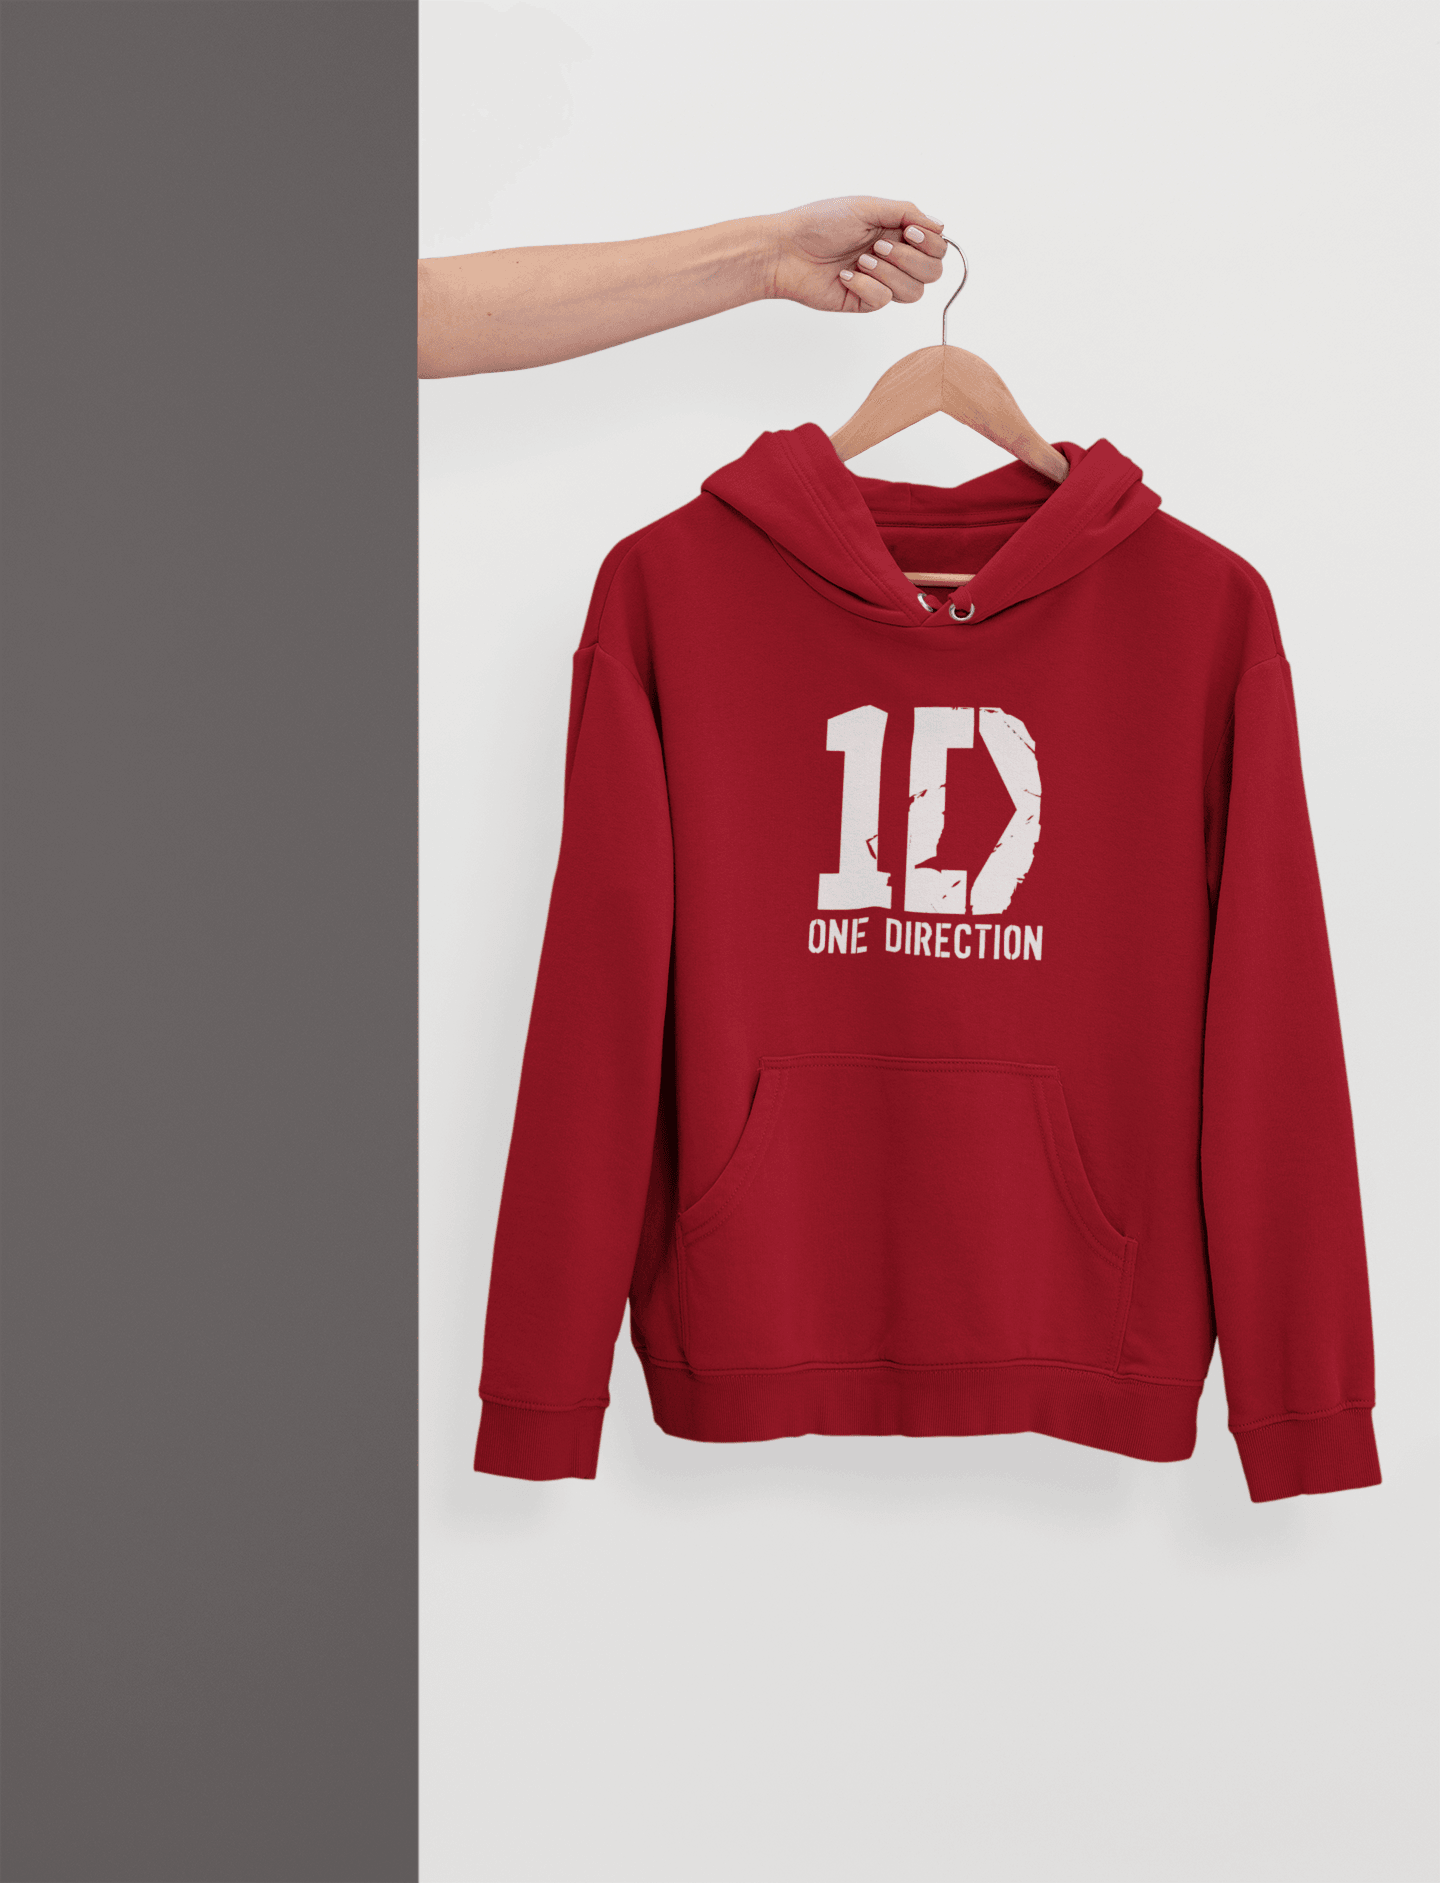 1 Direction: Music and Band - WINTER HOODIES